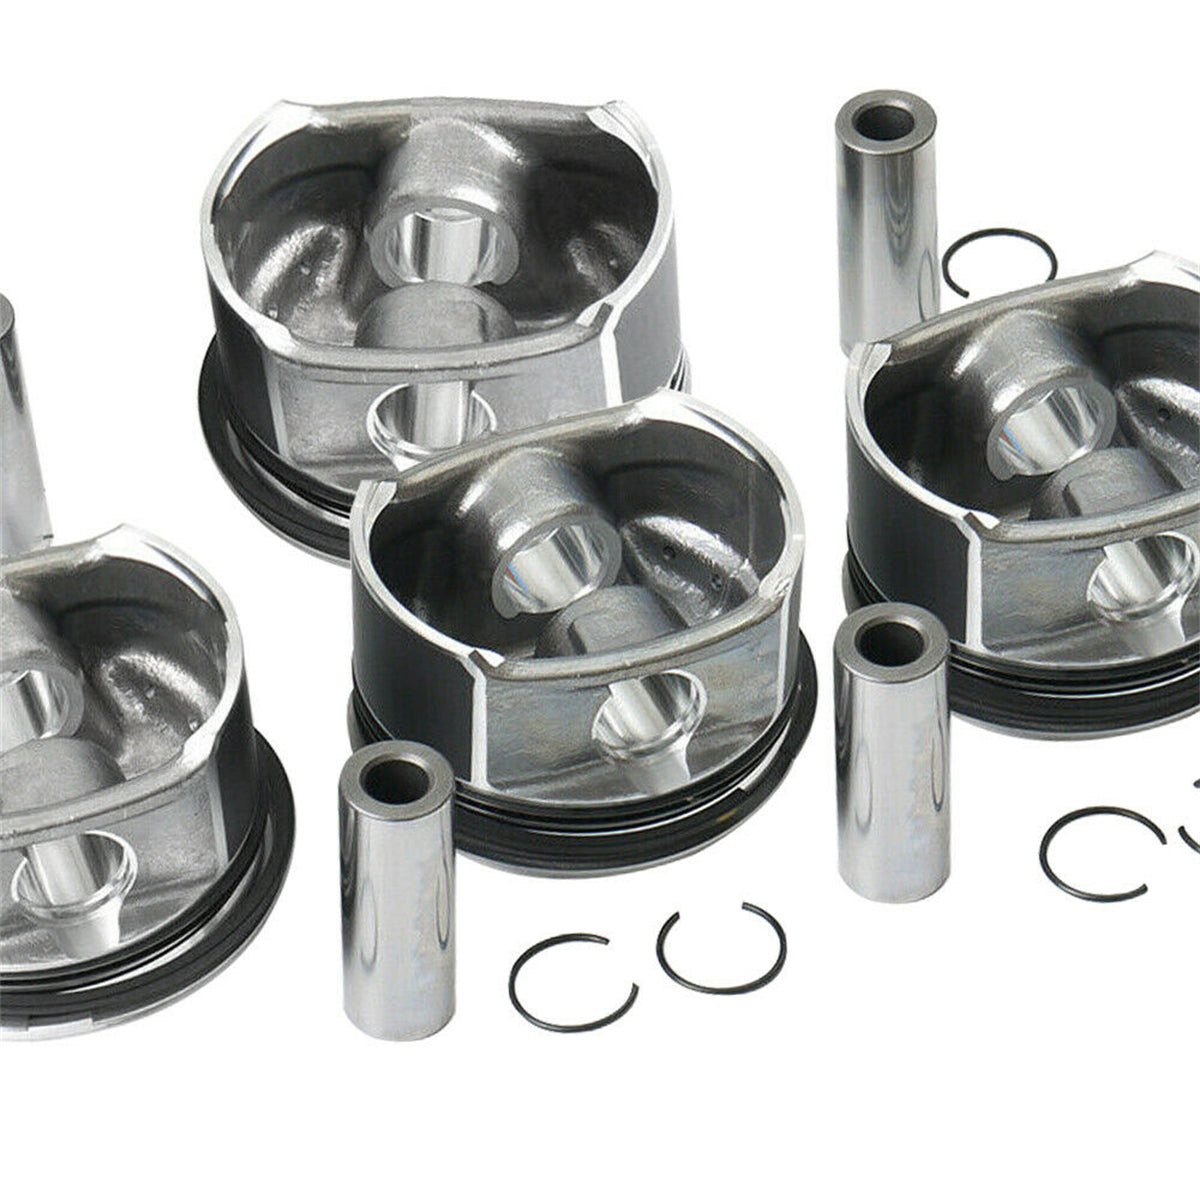 Daysyore®Pistons & Rings Set 2710302217 for Mercedes-Benz W203 W204 A209 C200K M271 1.8L Φ82mm